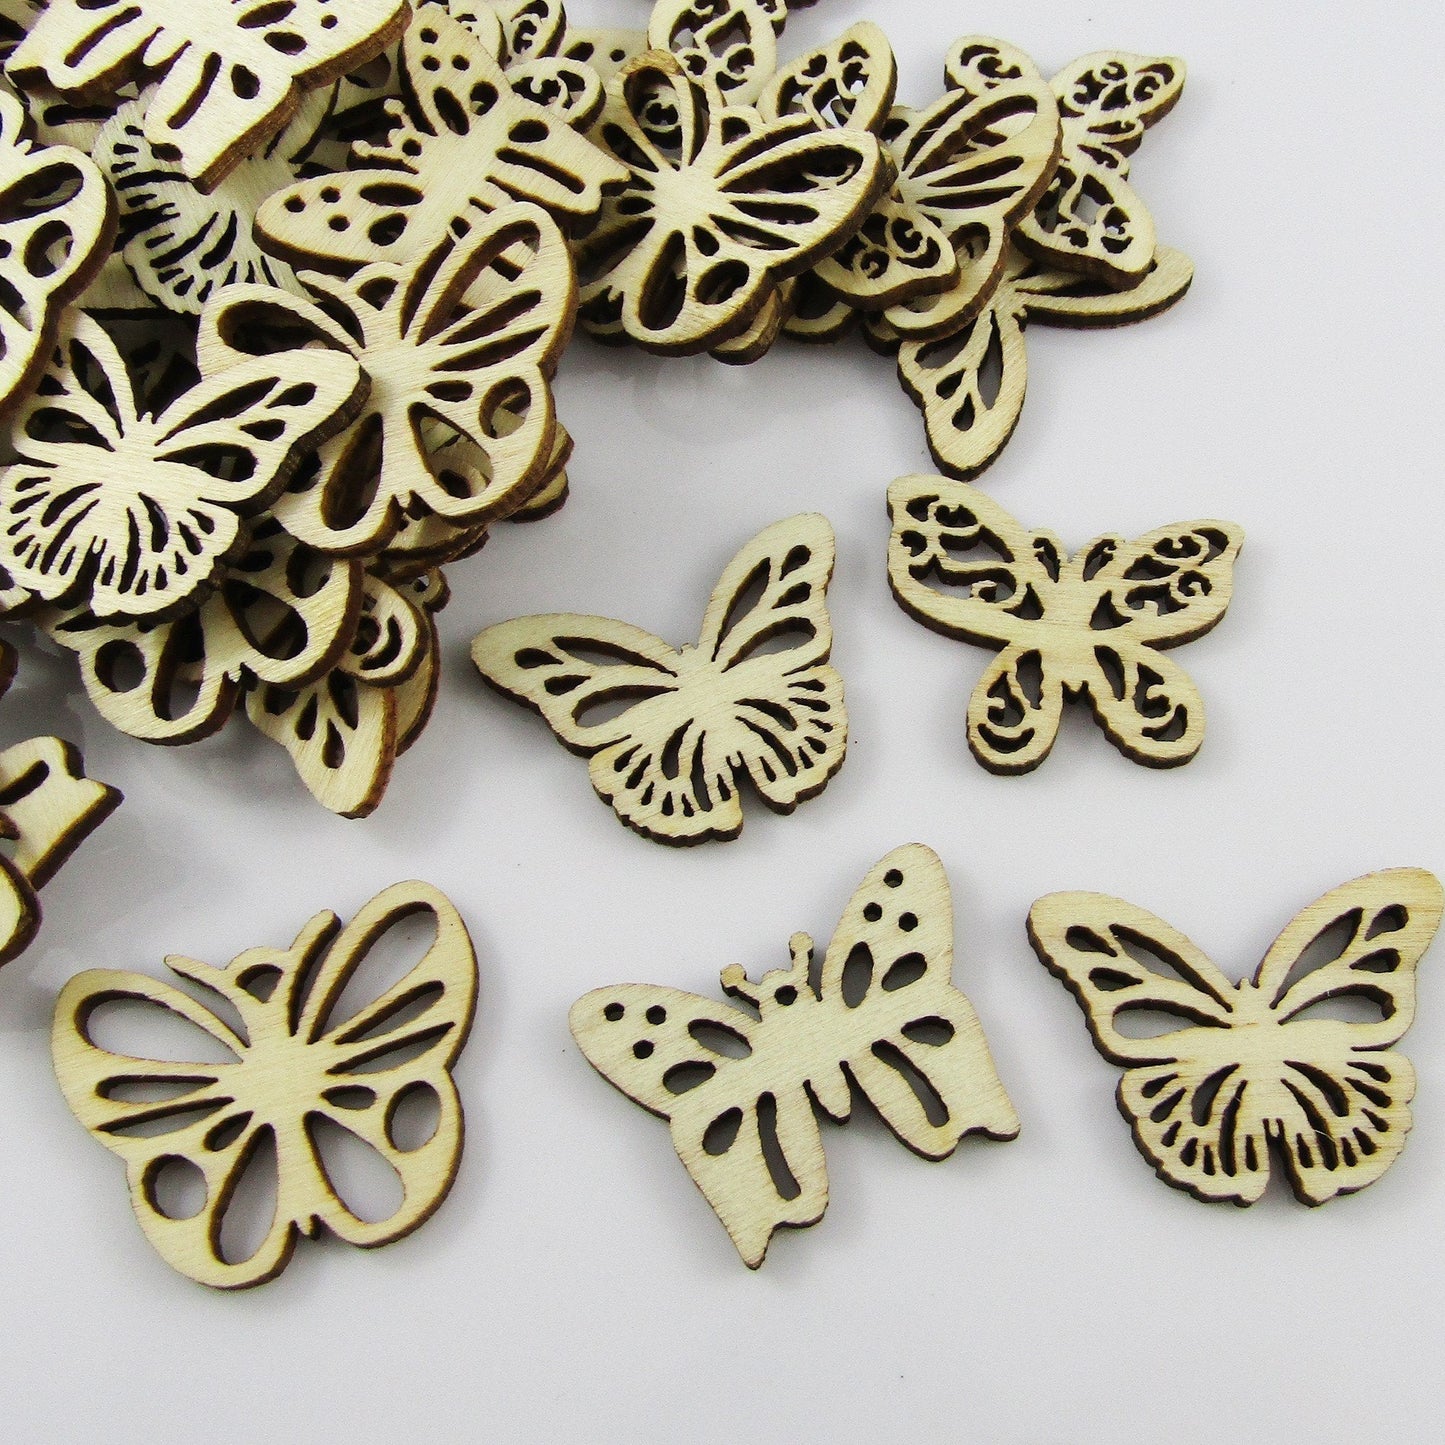 20pcs Laser Cut Wood Mixed Butterfly Embellishment Scrapbooking Cards & More!